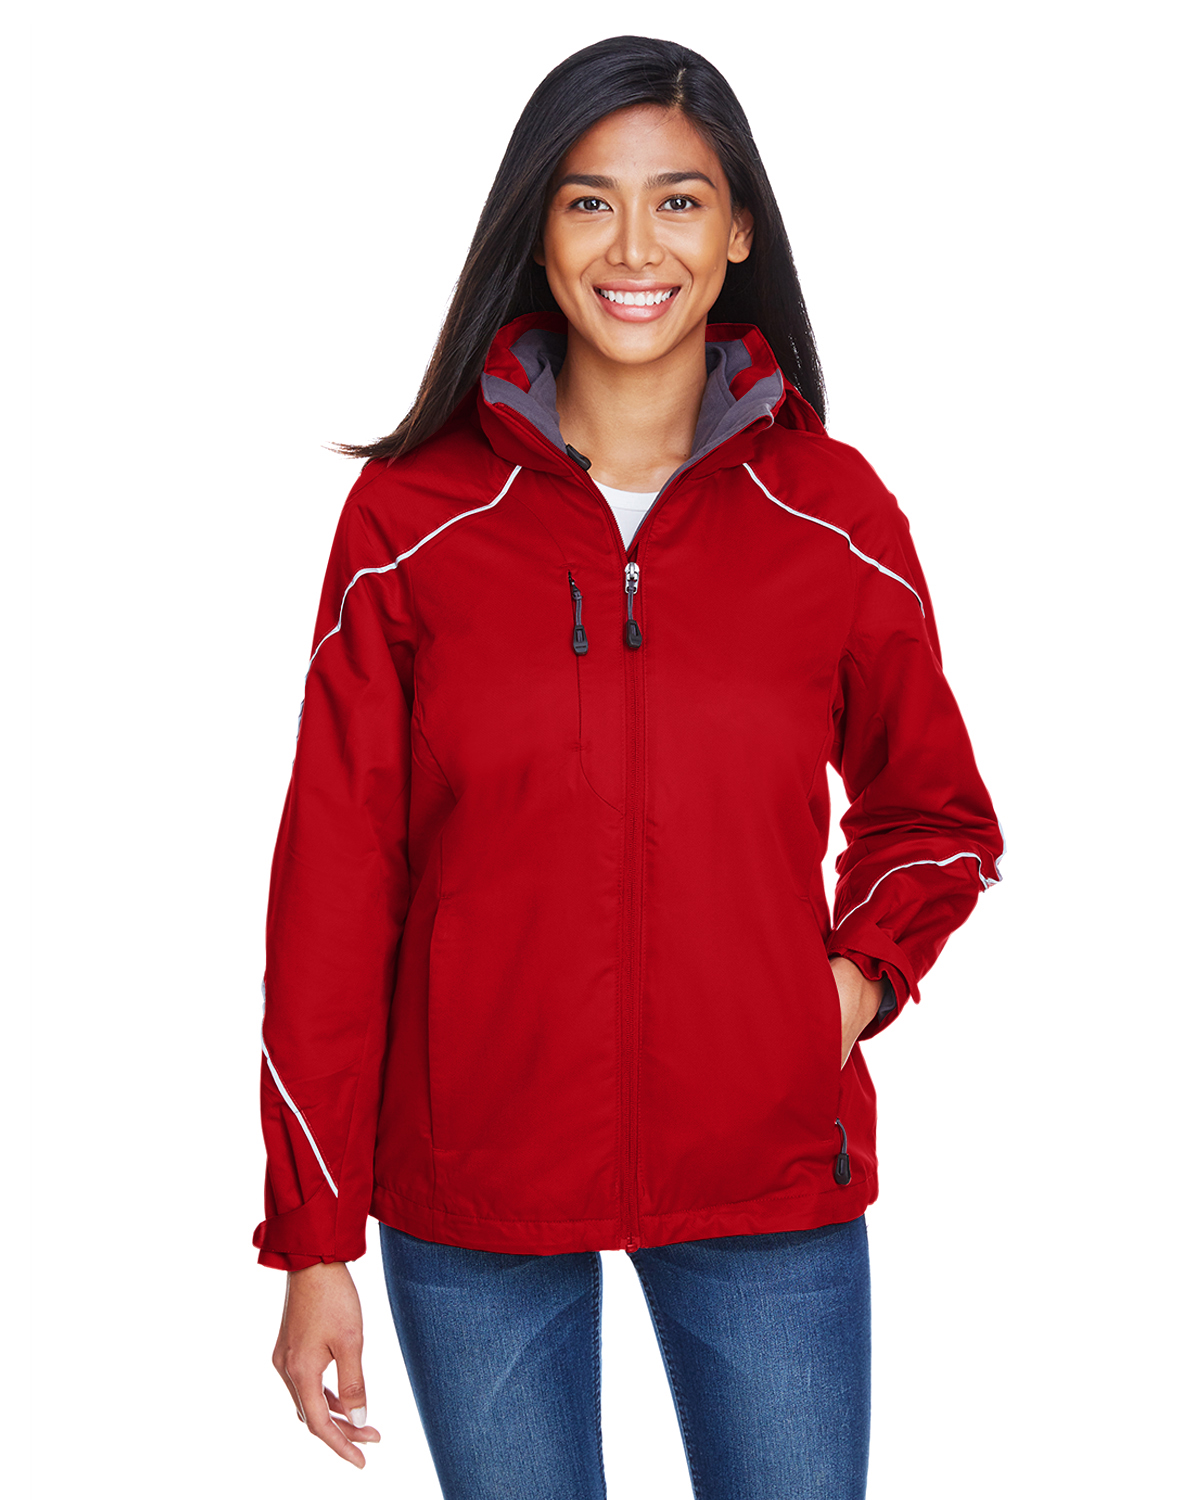 Ladies' Angle 3-in-1 Jacket with Bonded Fleece Liner - CLASSIC RED - XS - image 1 of 3